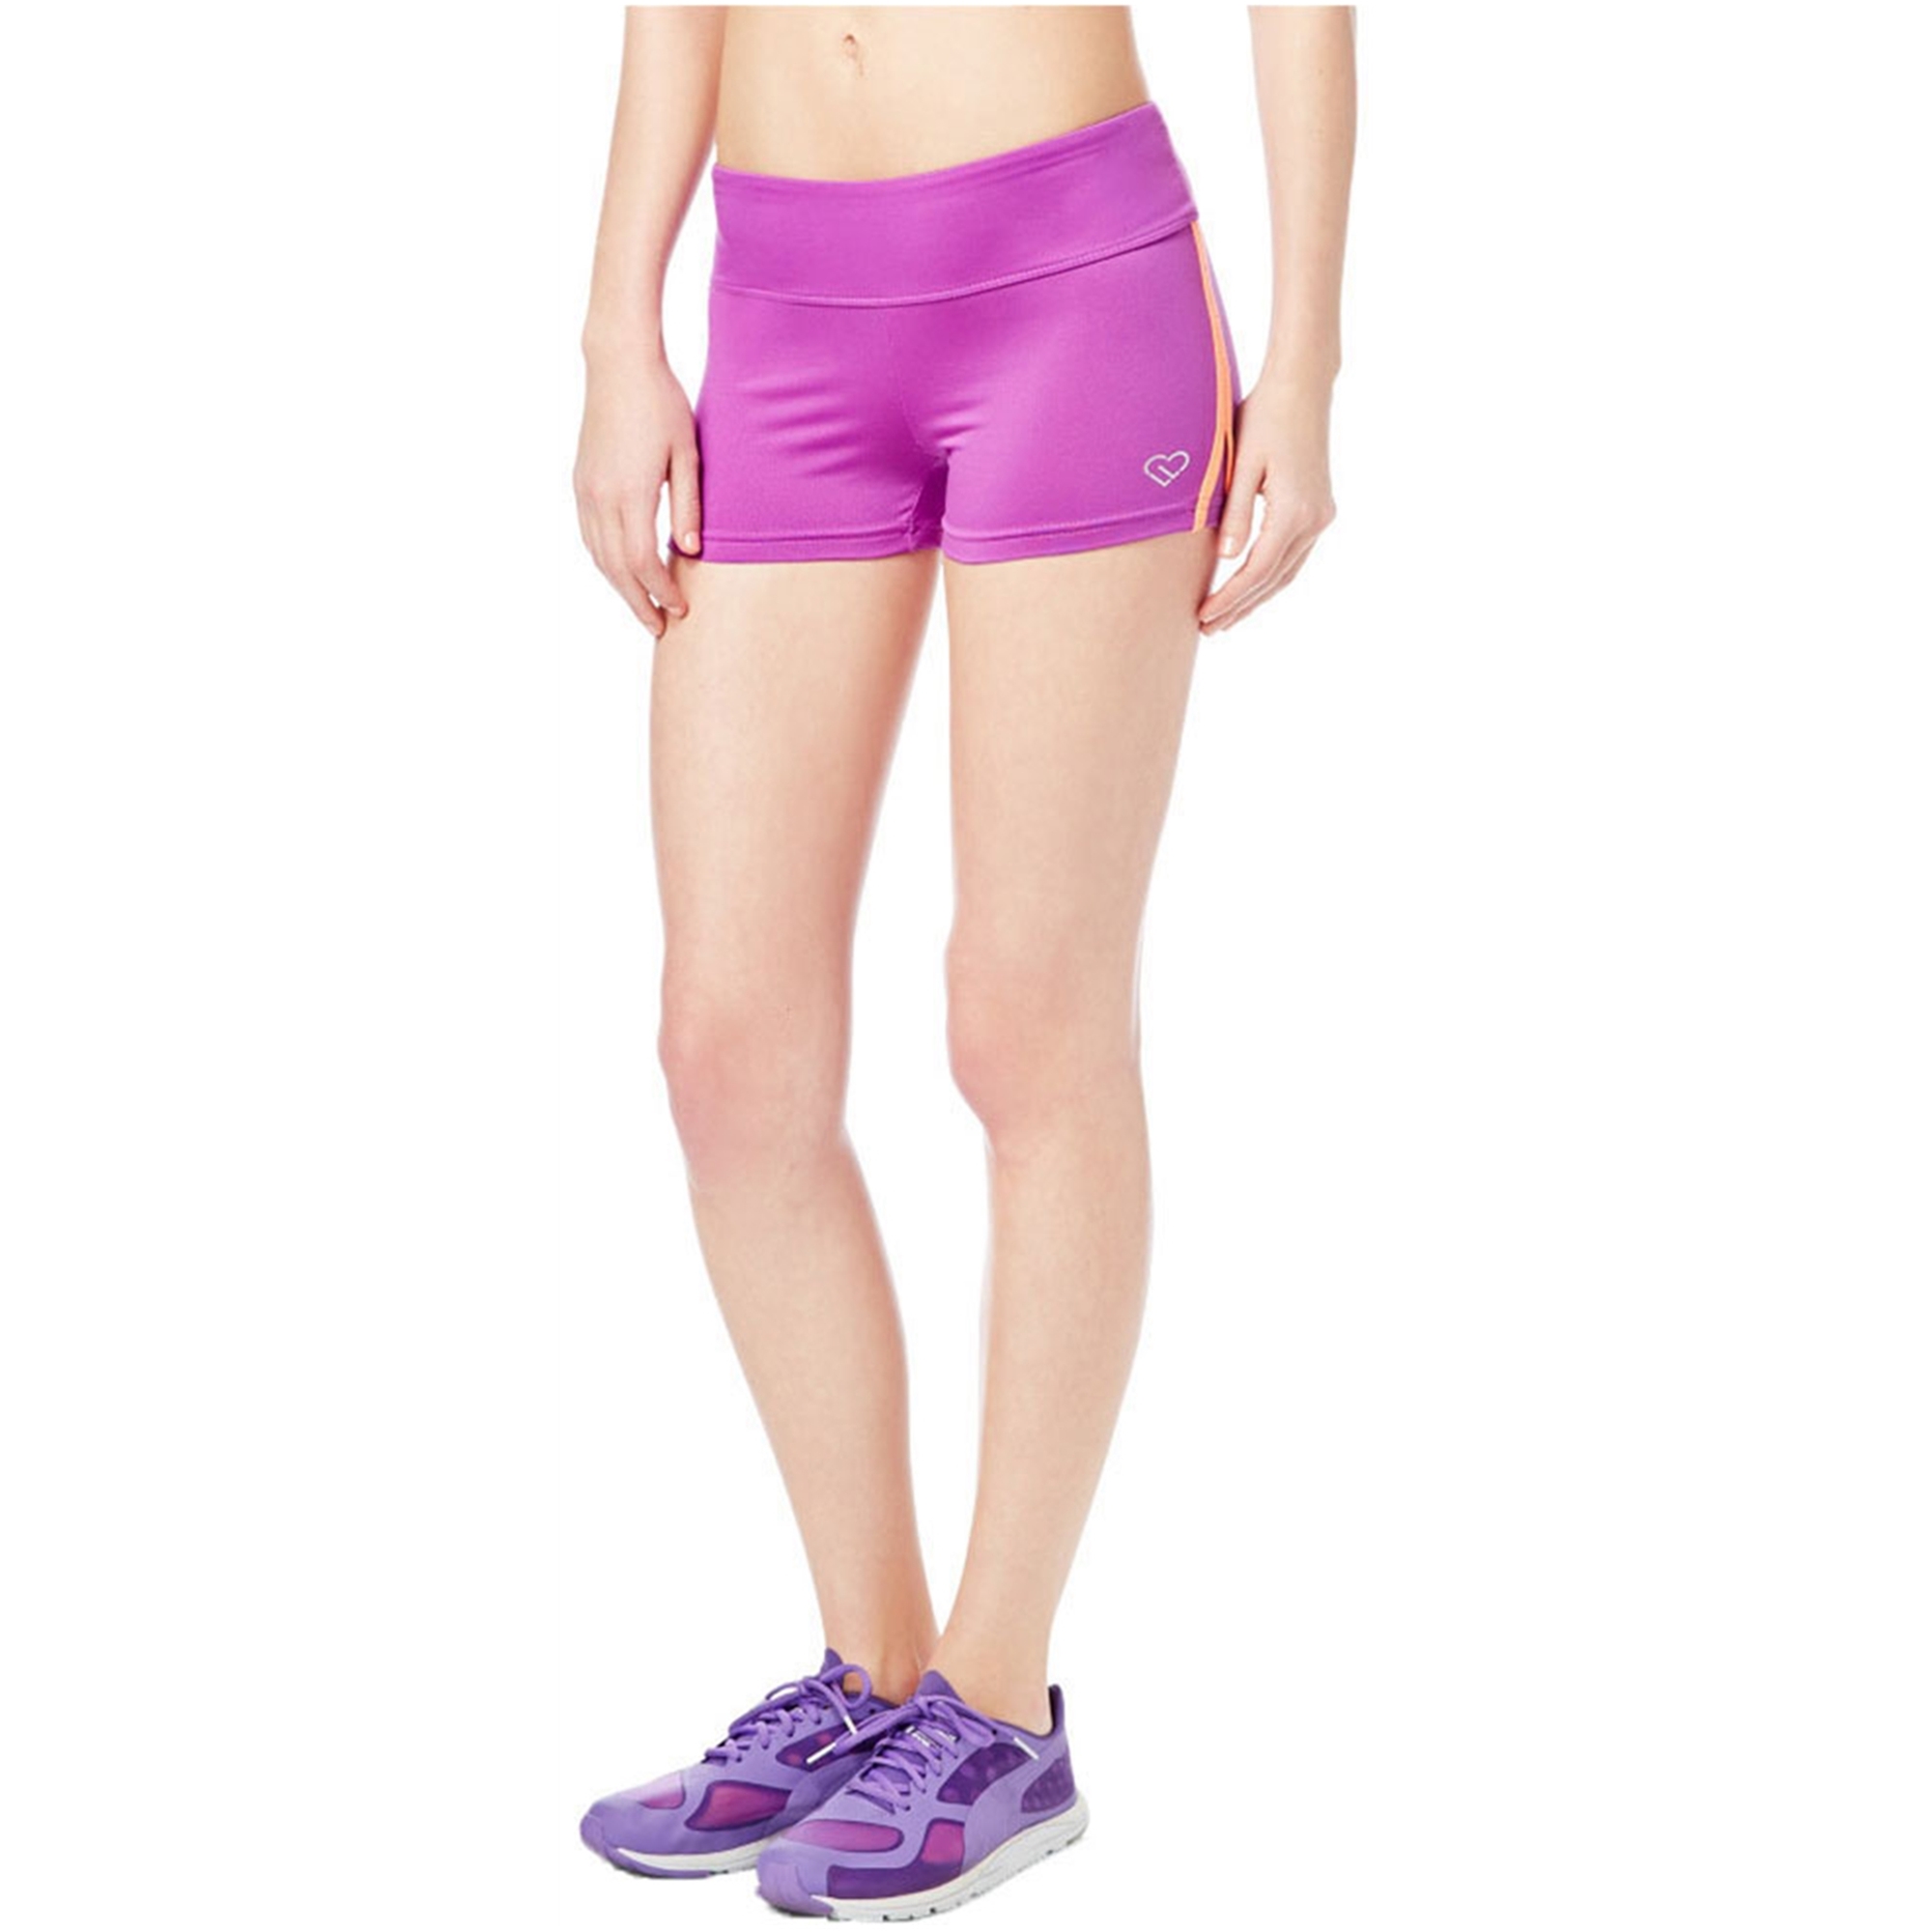 15 Minute Striped workout shorts for Women